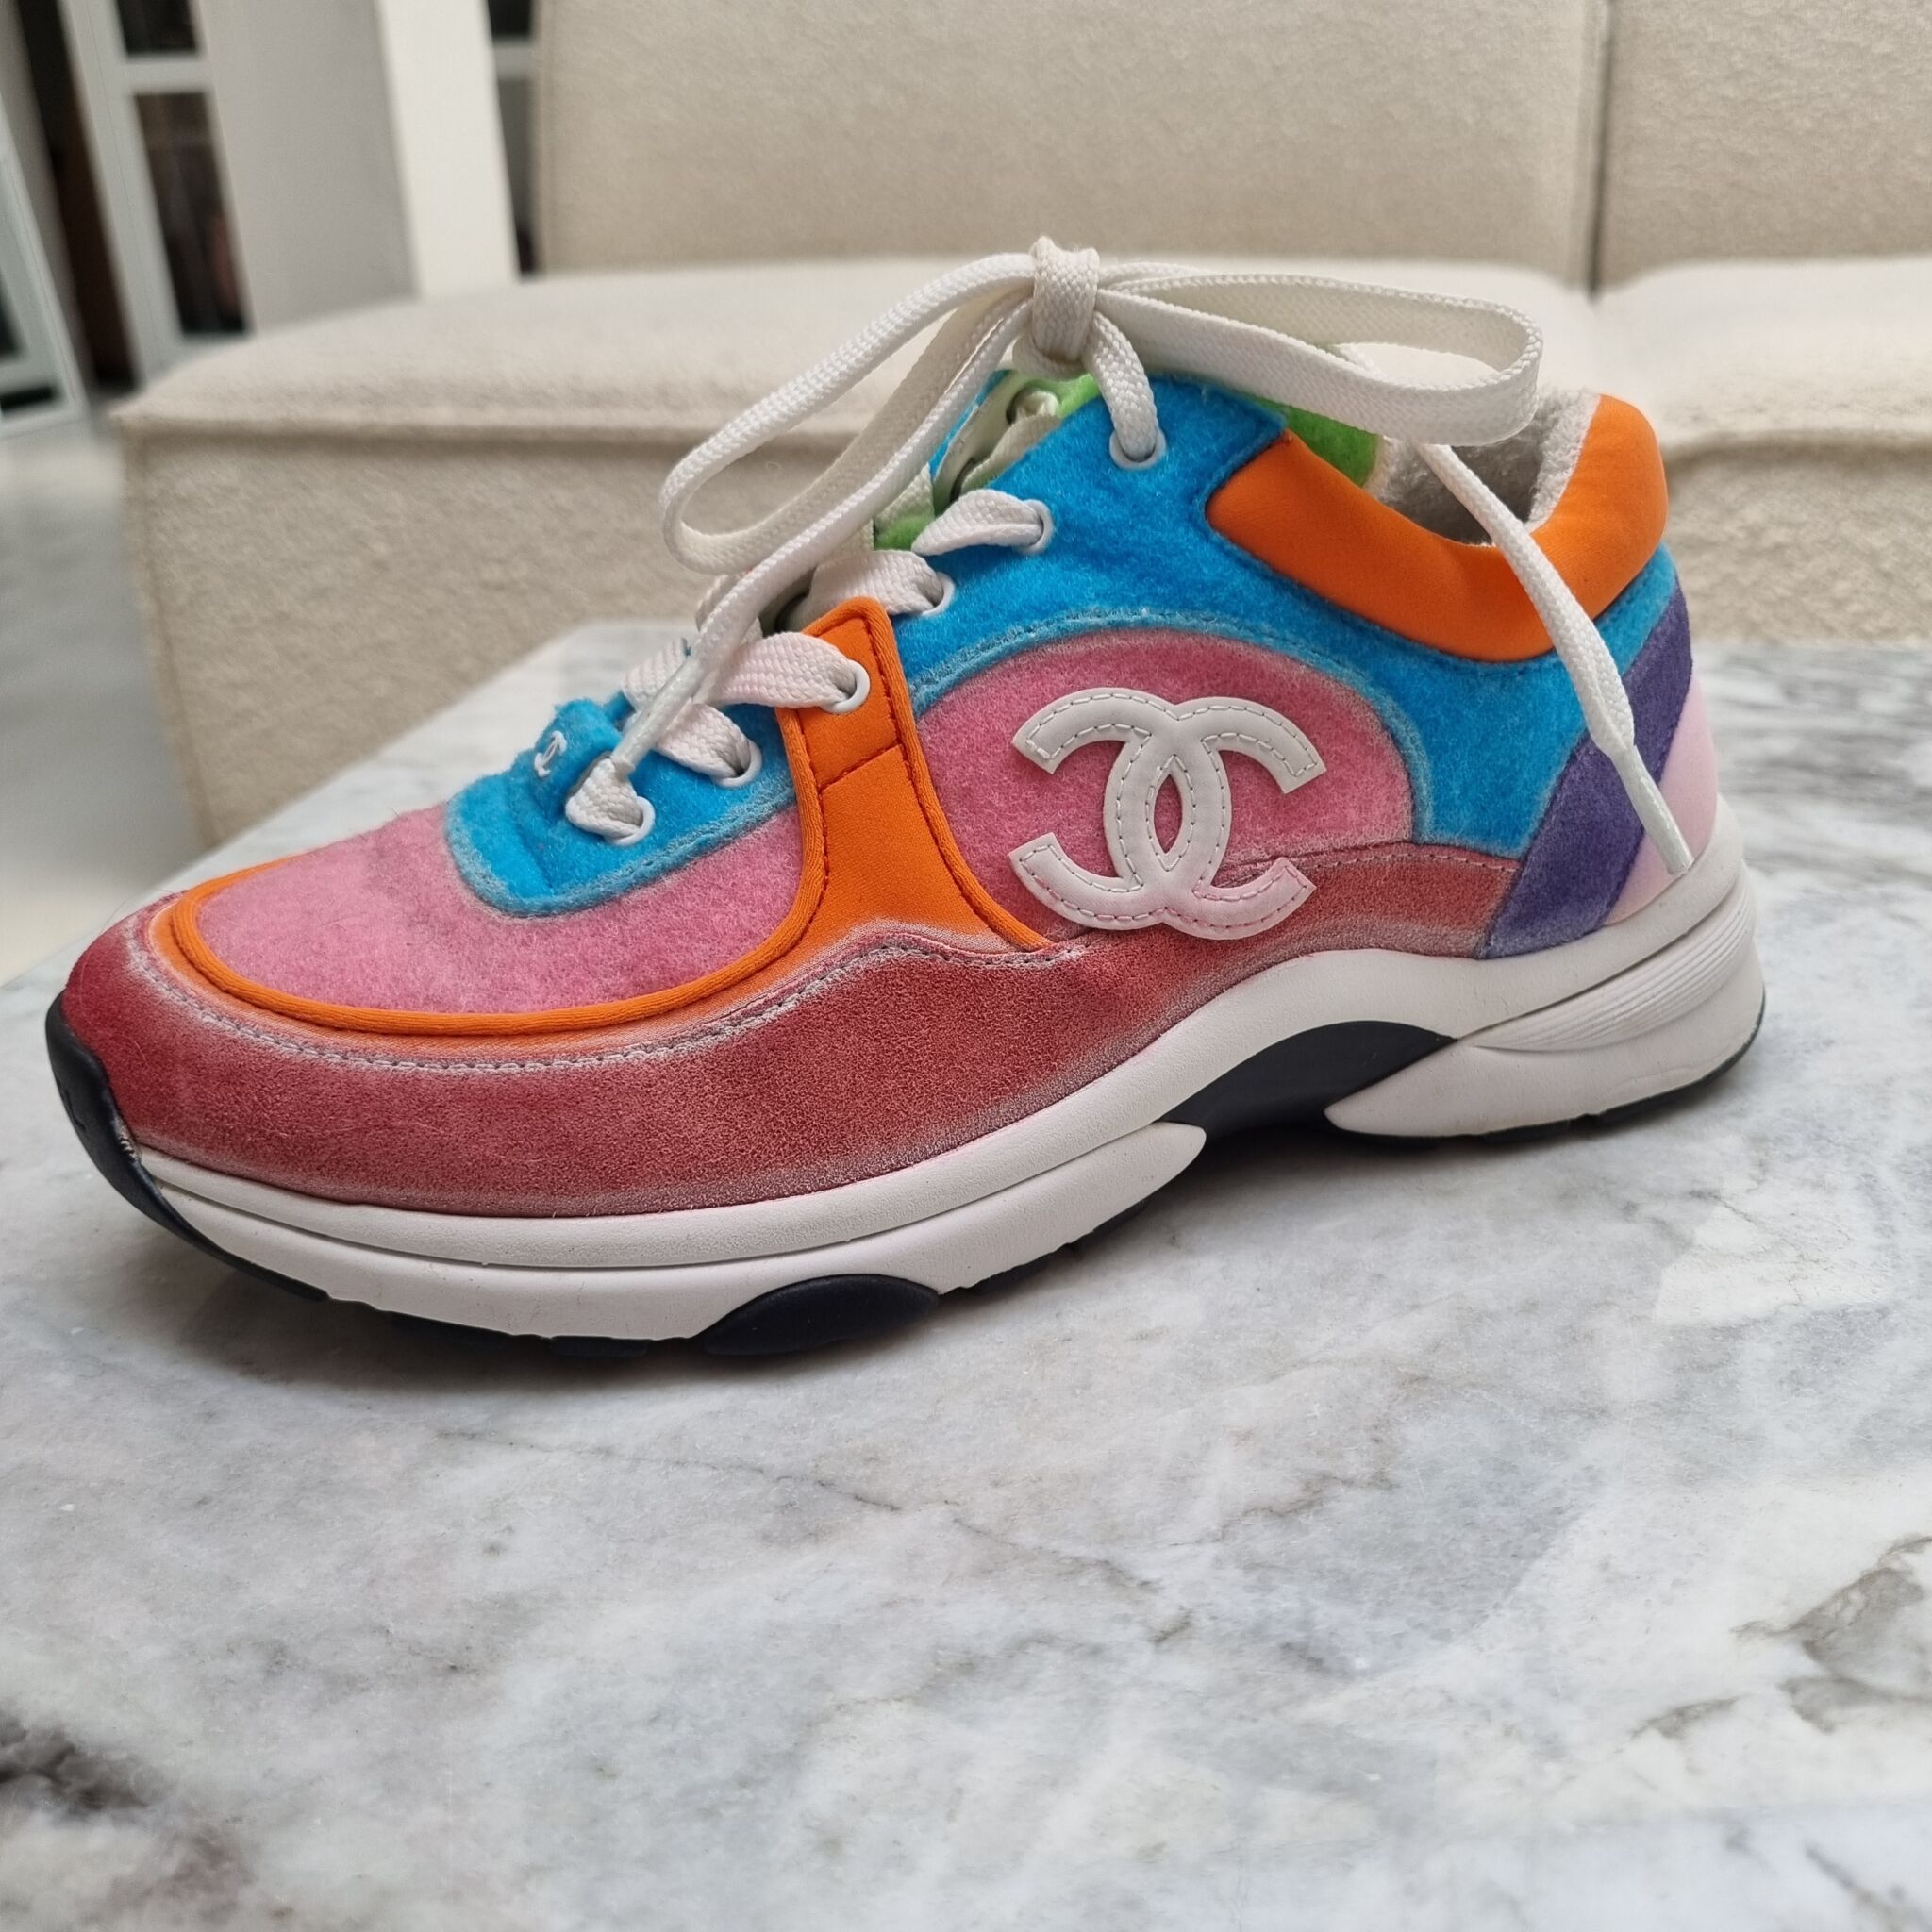 Chanel x Pharrell Low-Top Sneakers - Women's 37 – Fashionably Yours